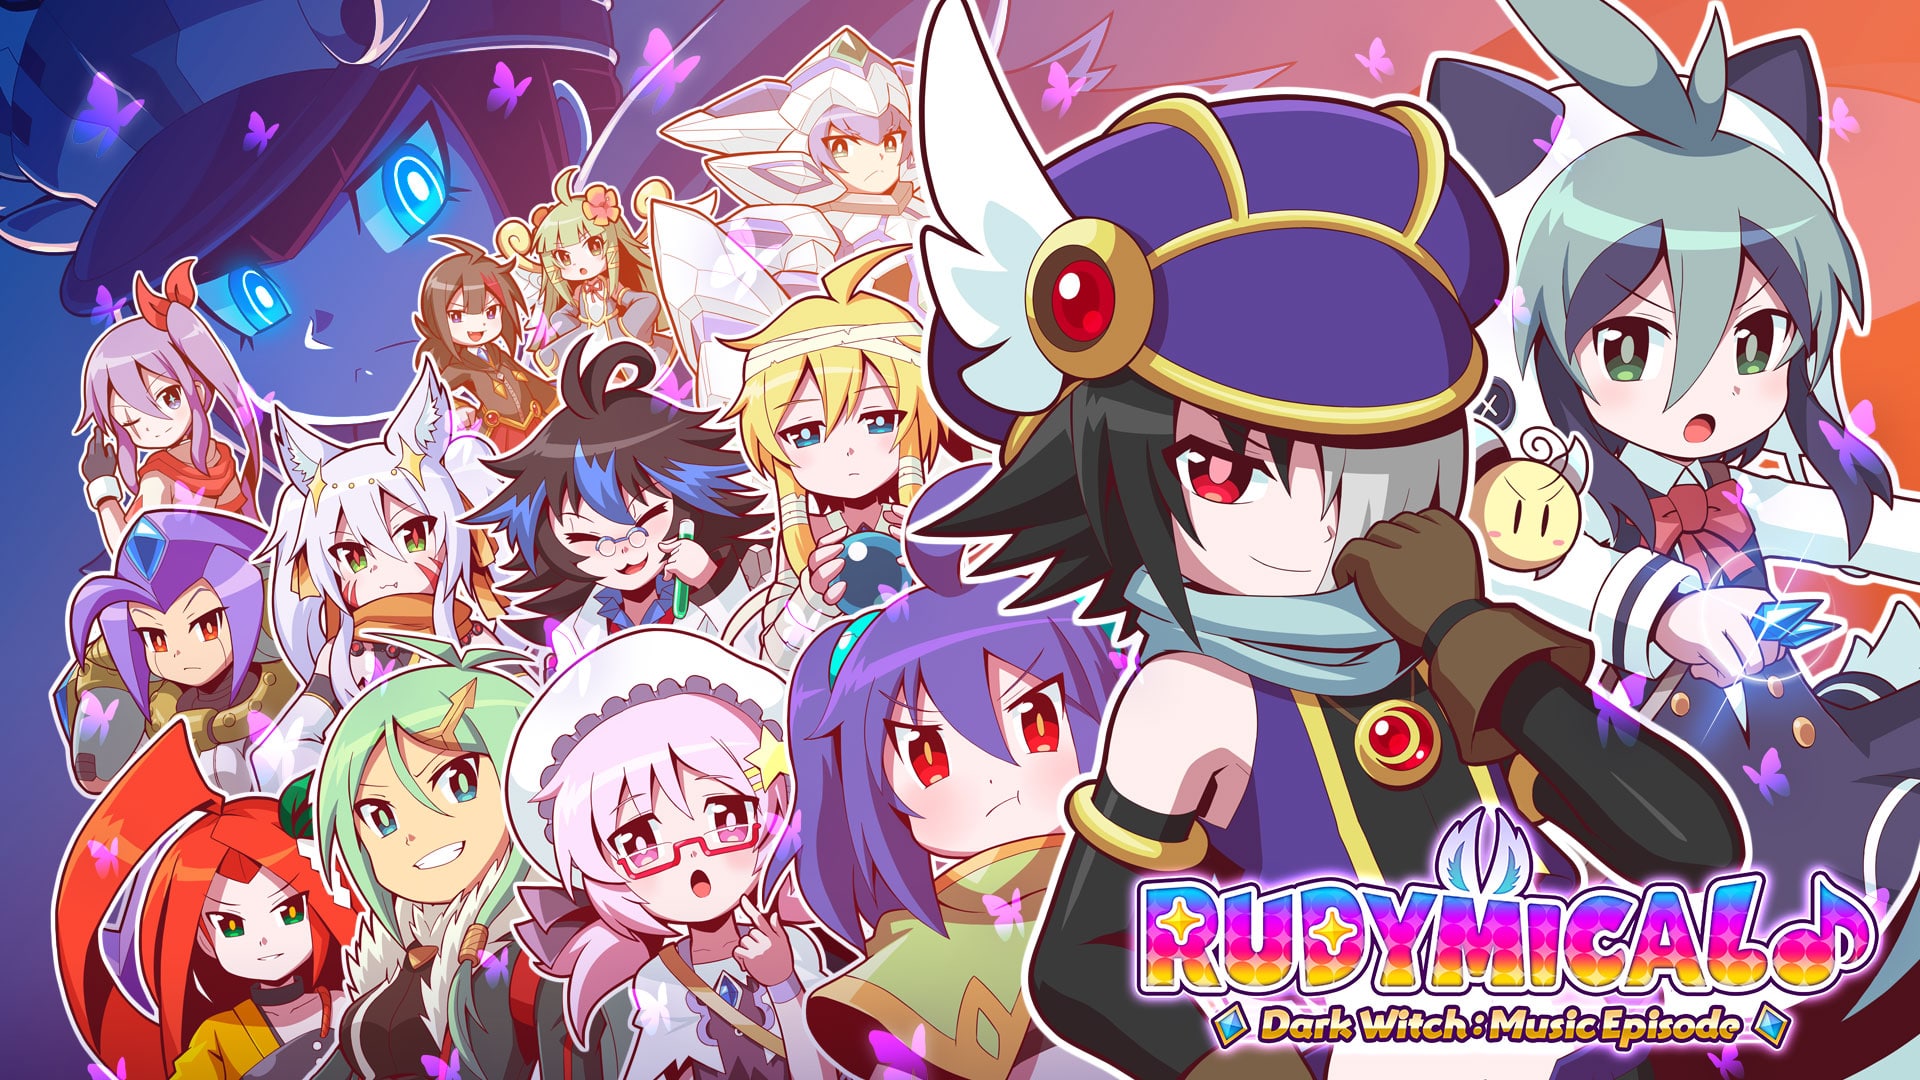 Spin-Off Rhythm Game ‘Dark Witch Music Episode: Rudymical’ Launches on PC